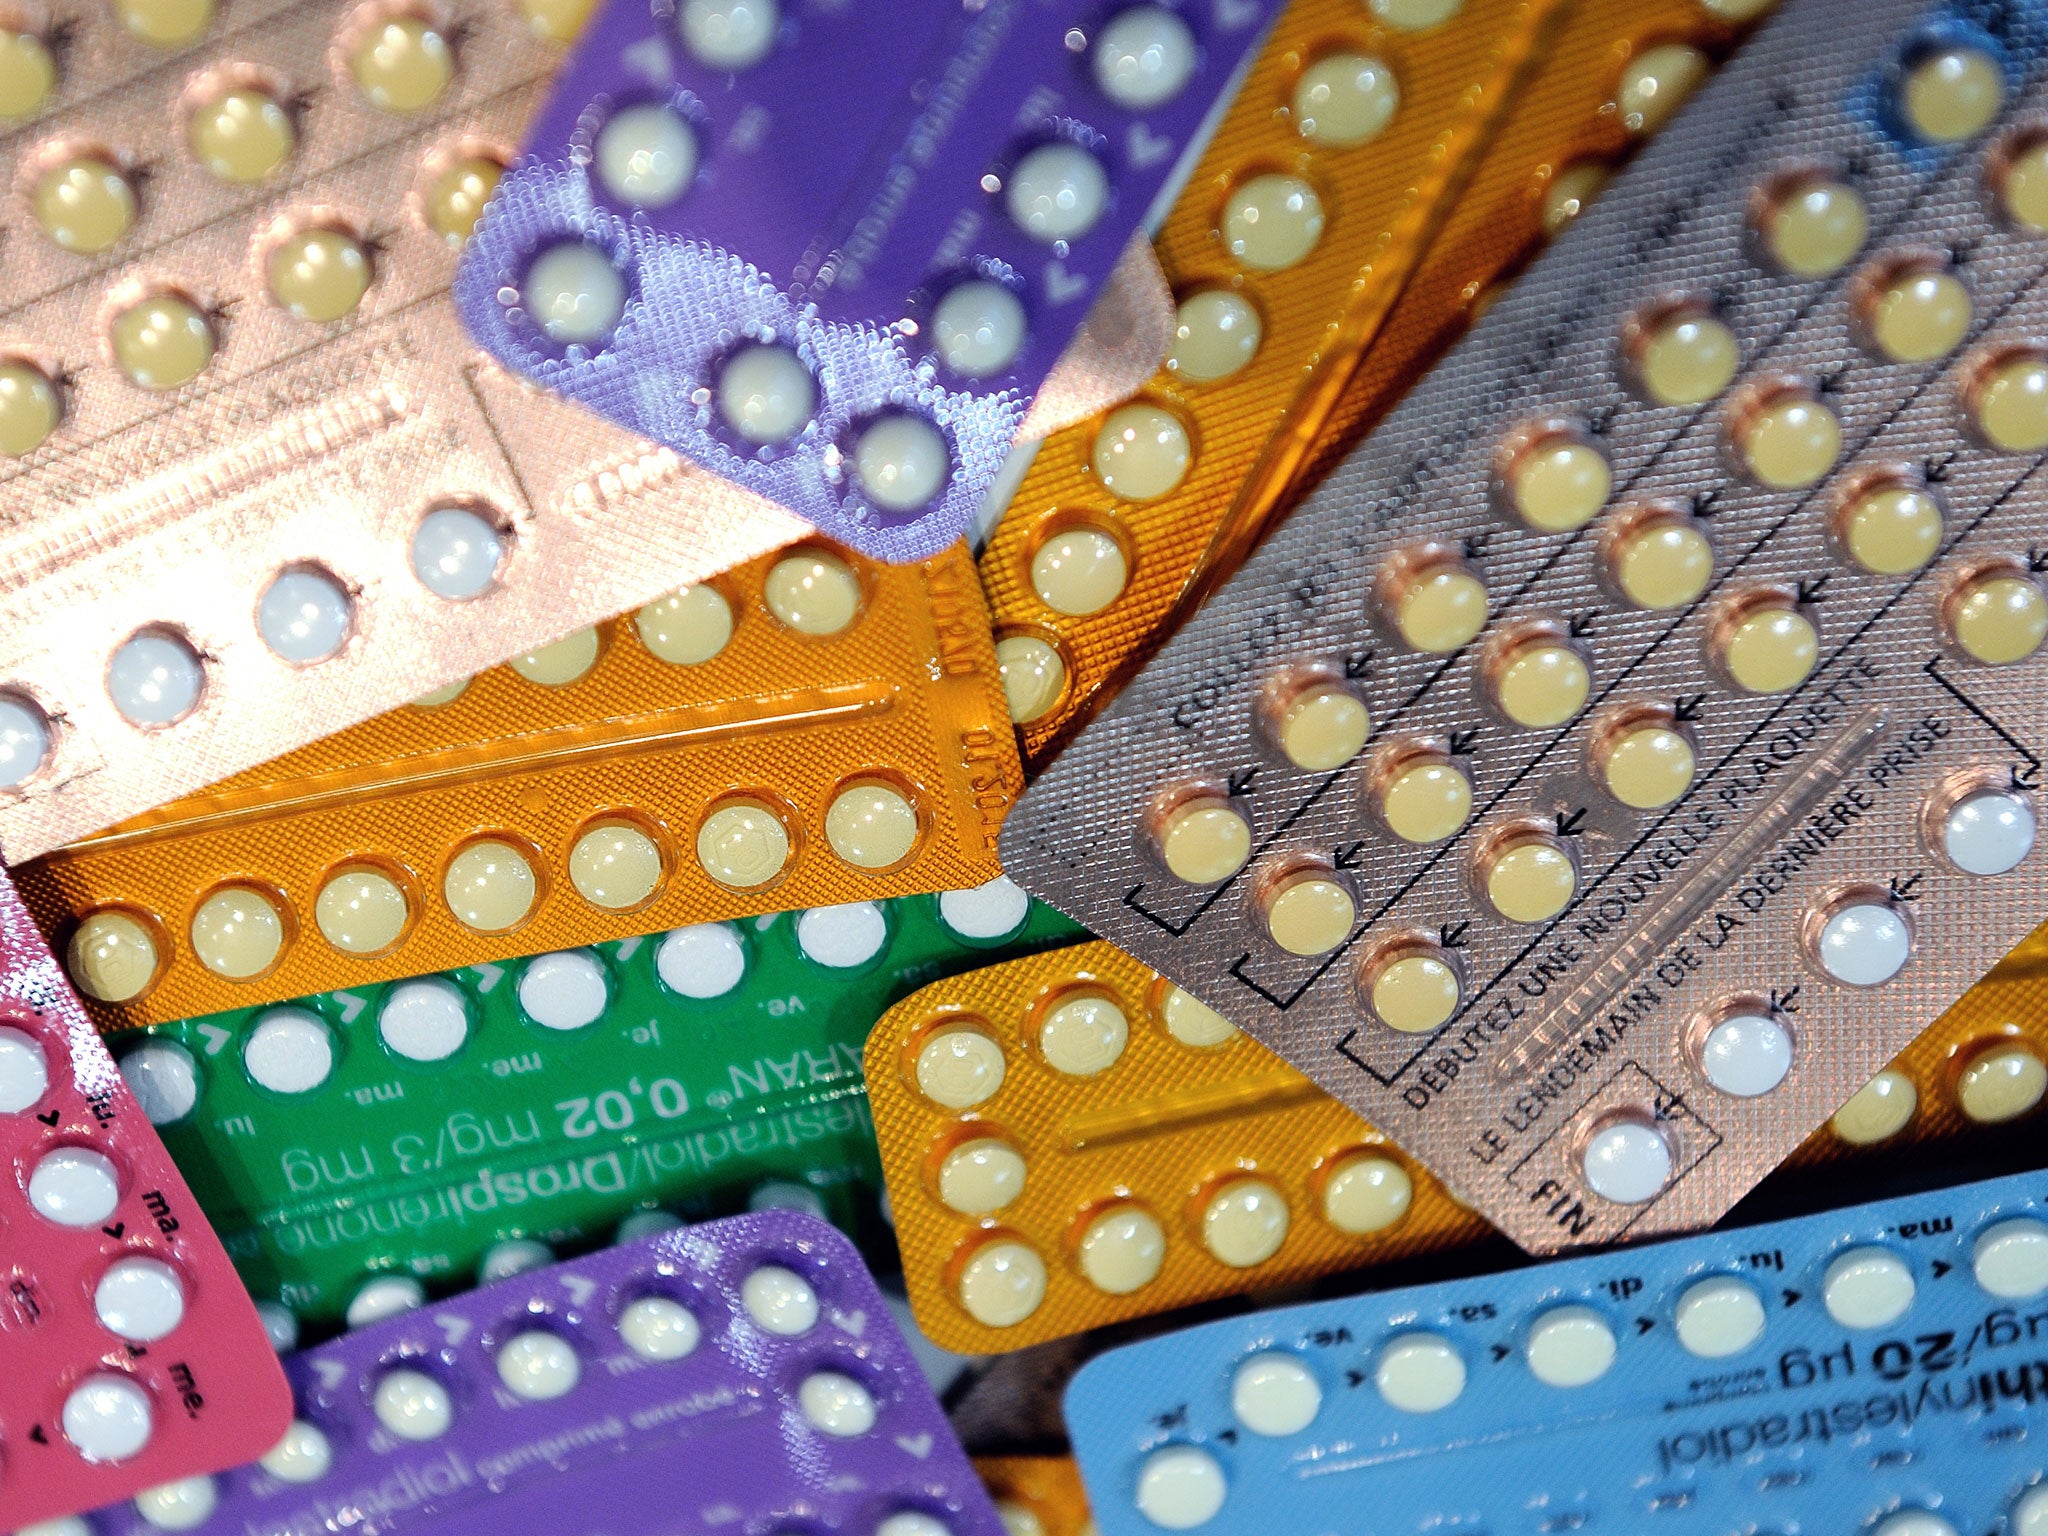 Half of women would consider taking a once-a-month contraceptive pill, according to a new survey, but 'out-dated' abortion laws are holding back development of new kinds of drug